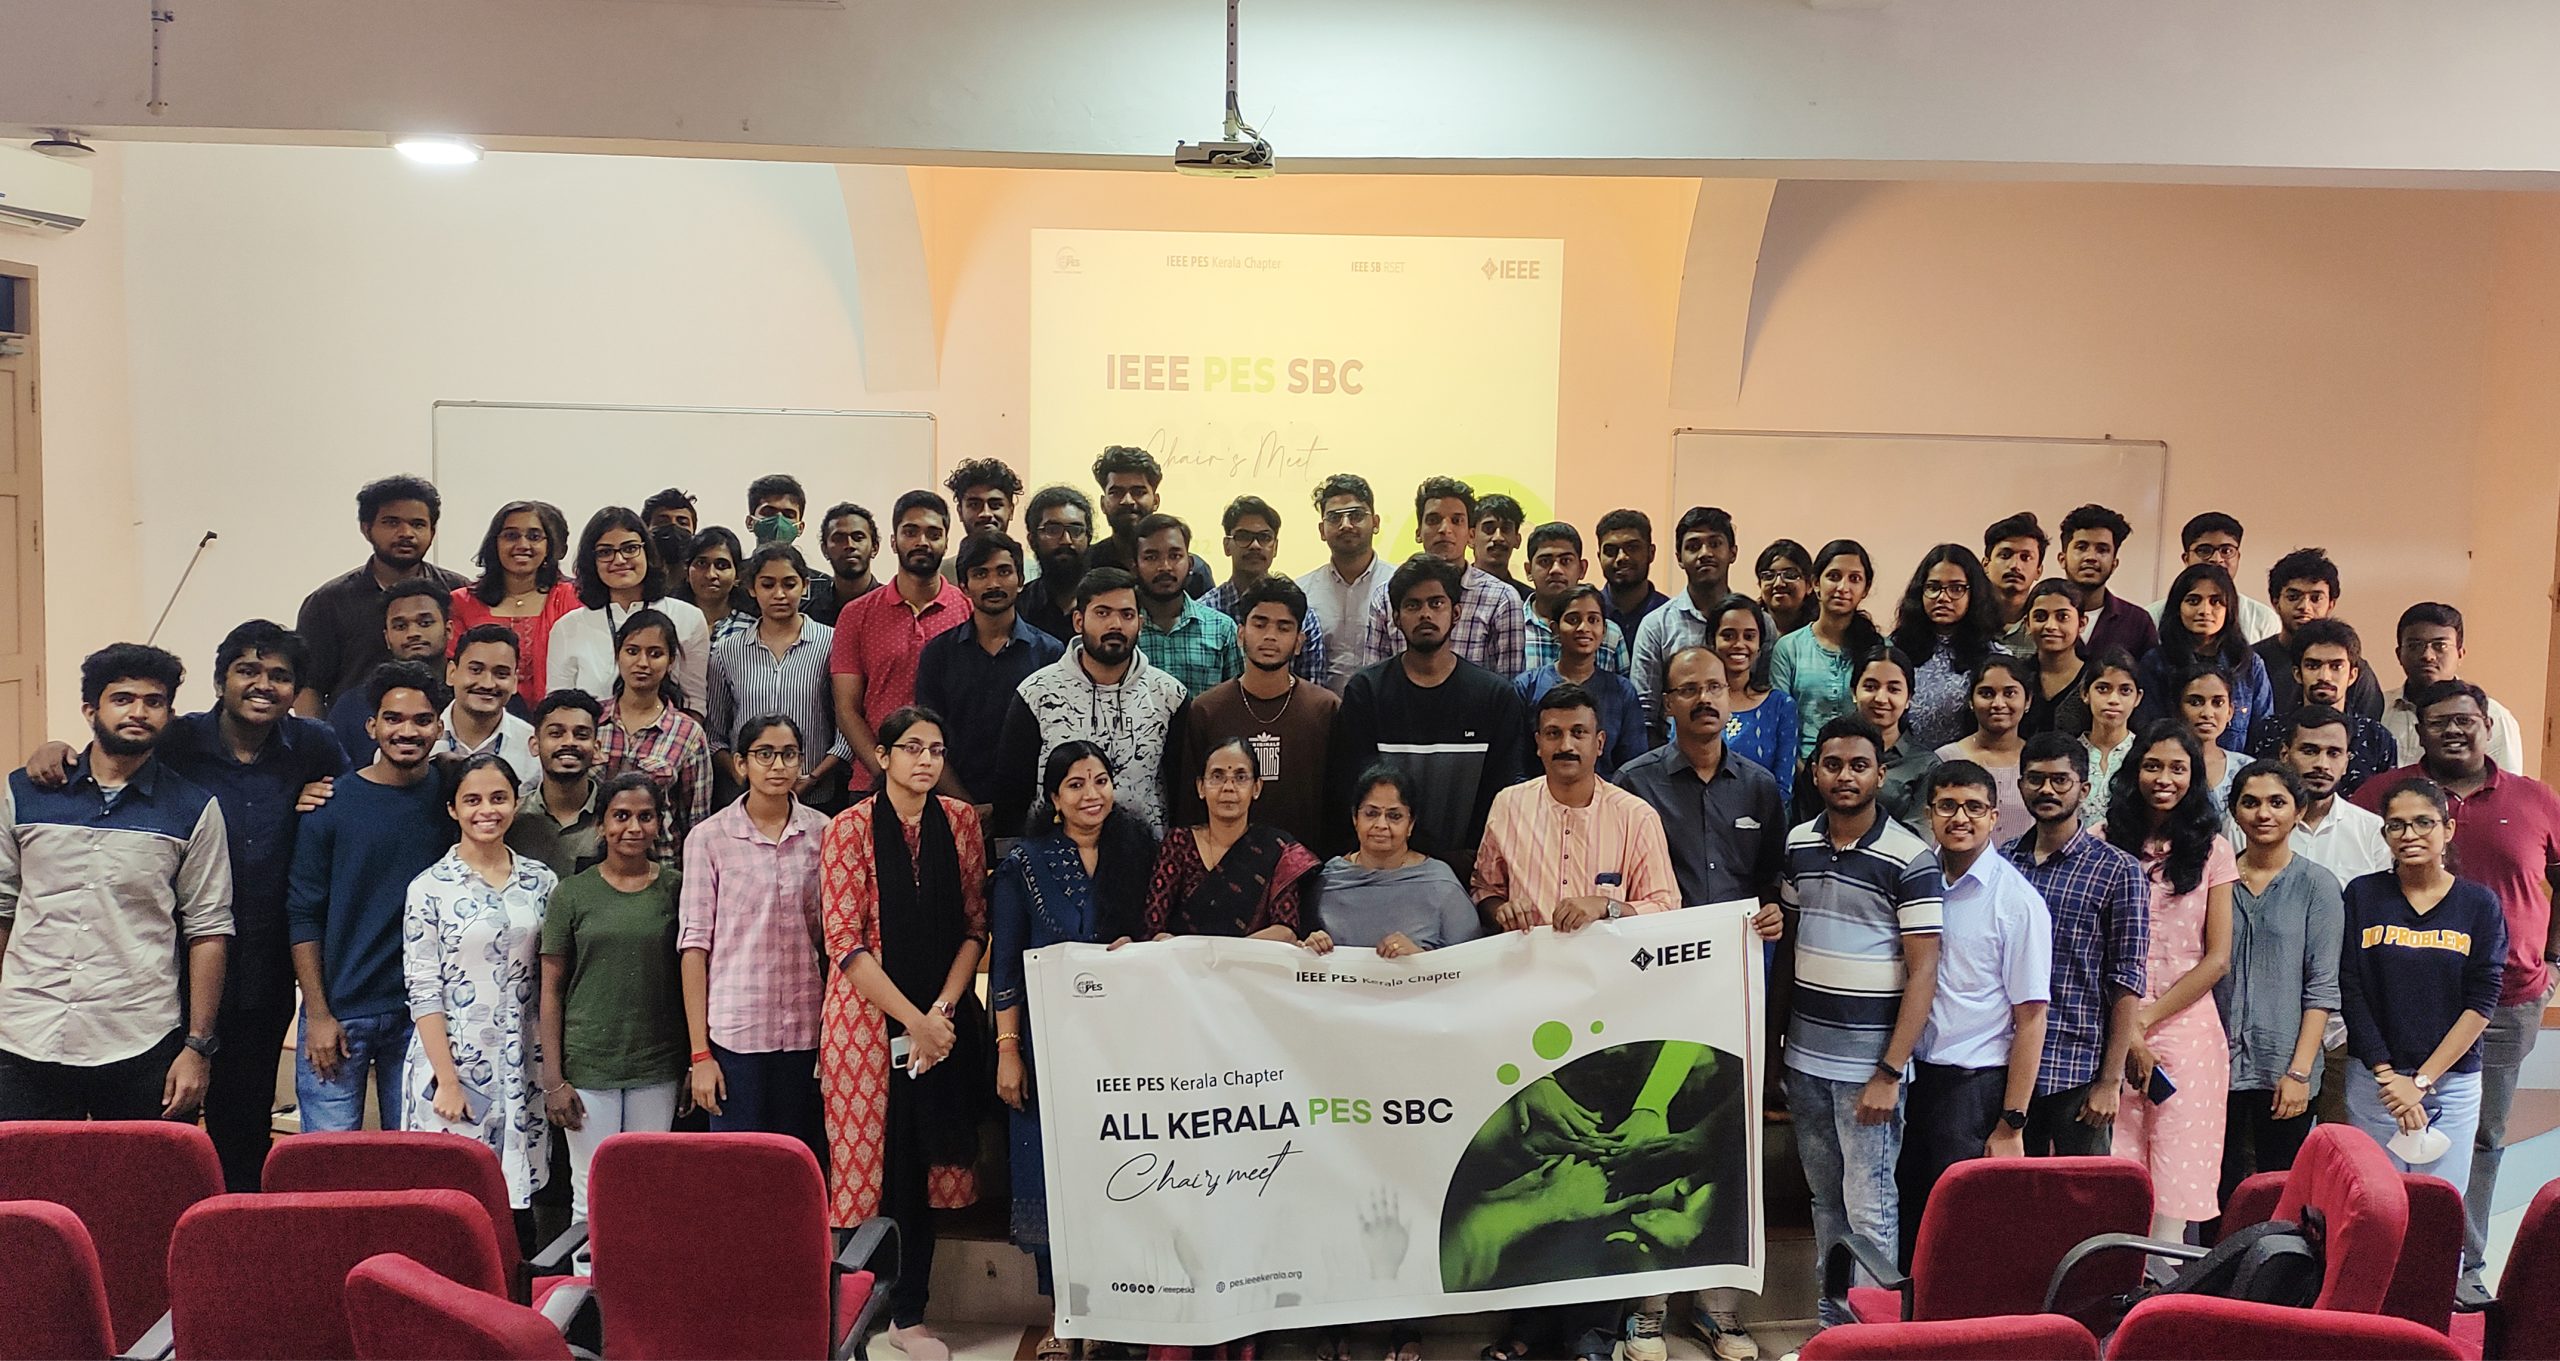 â€œWe may not have it all together, but together we have it all.â€�ðŸ’¯  IEEE PES Kerala Chapter gracefully conducted the Chair's Meet on 11th June.  Chair's from over the State came together with the Student Leadership Team and the Office bearers which made the event a grand success and portrayal of the strong team which makes the IEEE PES Kerala Chapter as it isðŸ’š